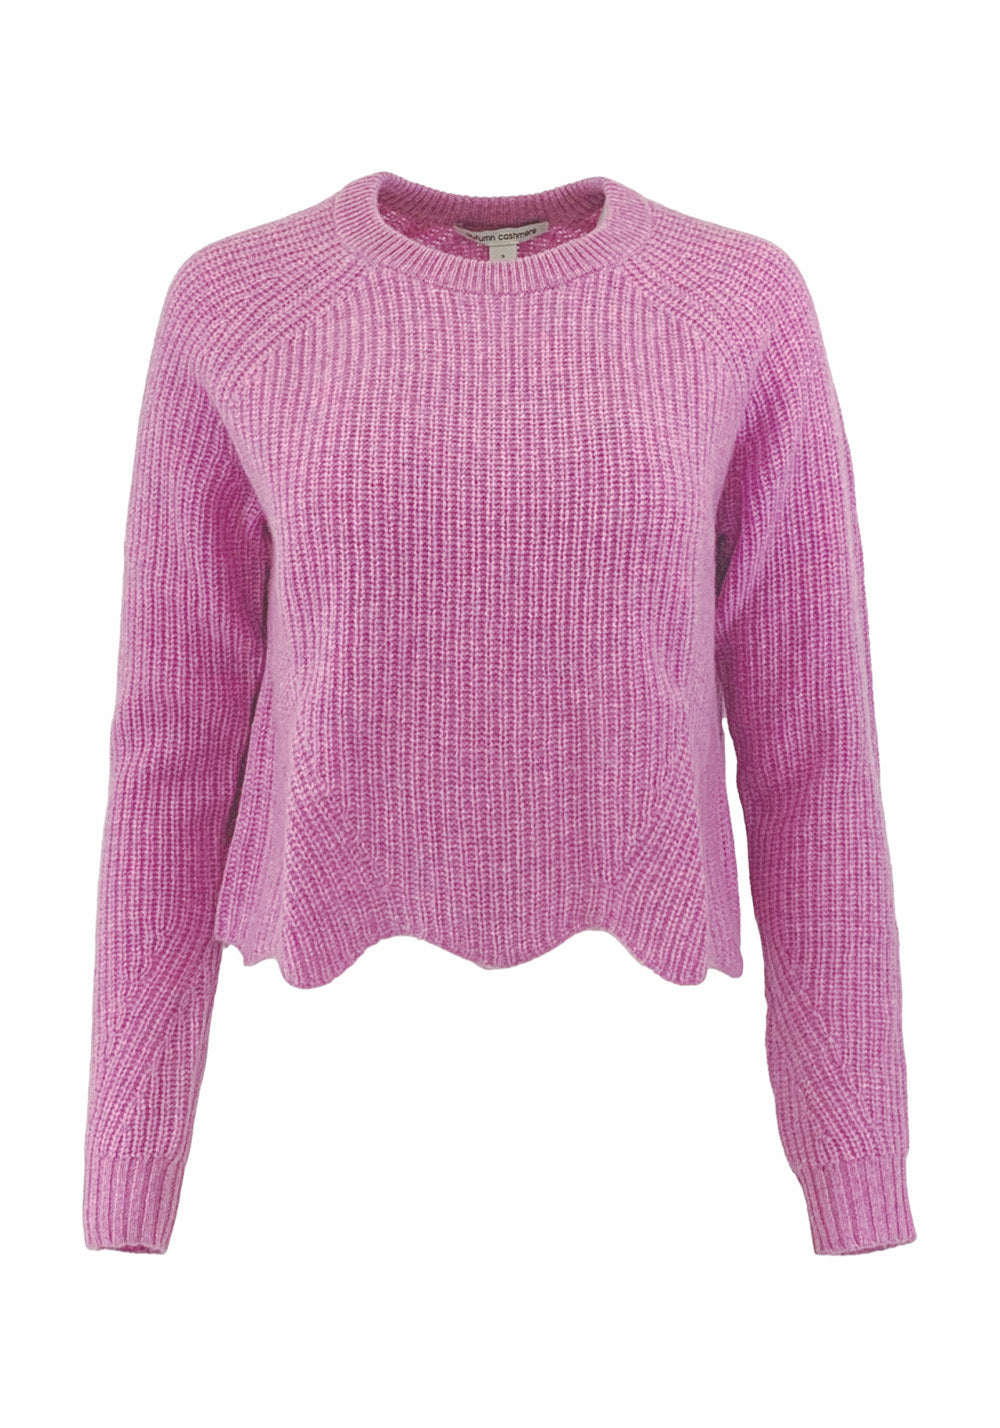 CASHMERE SCALLOPED SHAKER SWEATER (BERRY FROST) - AUTUMN CASHMERE